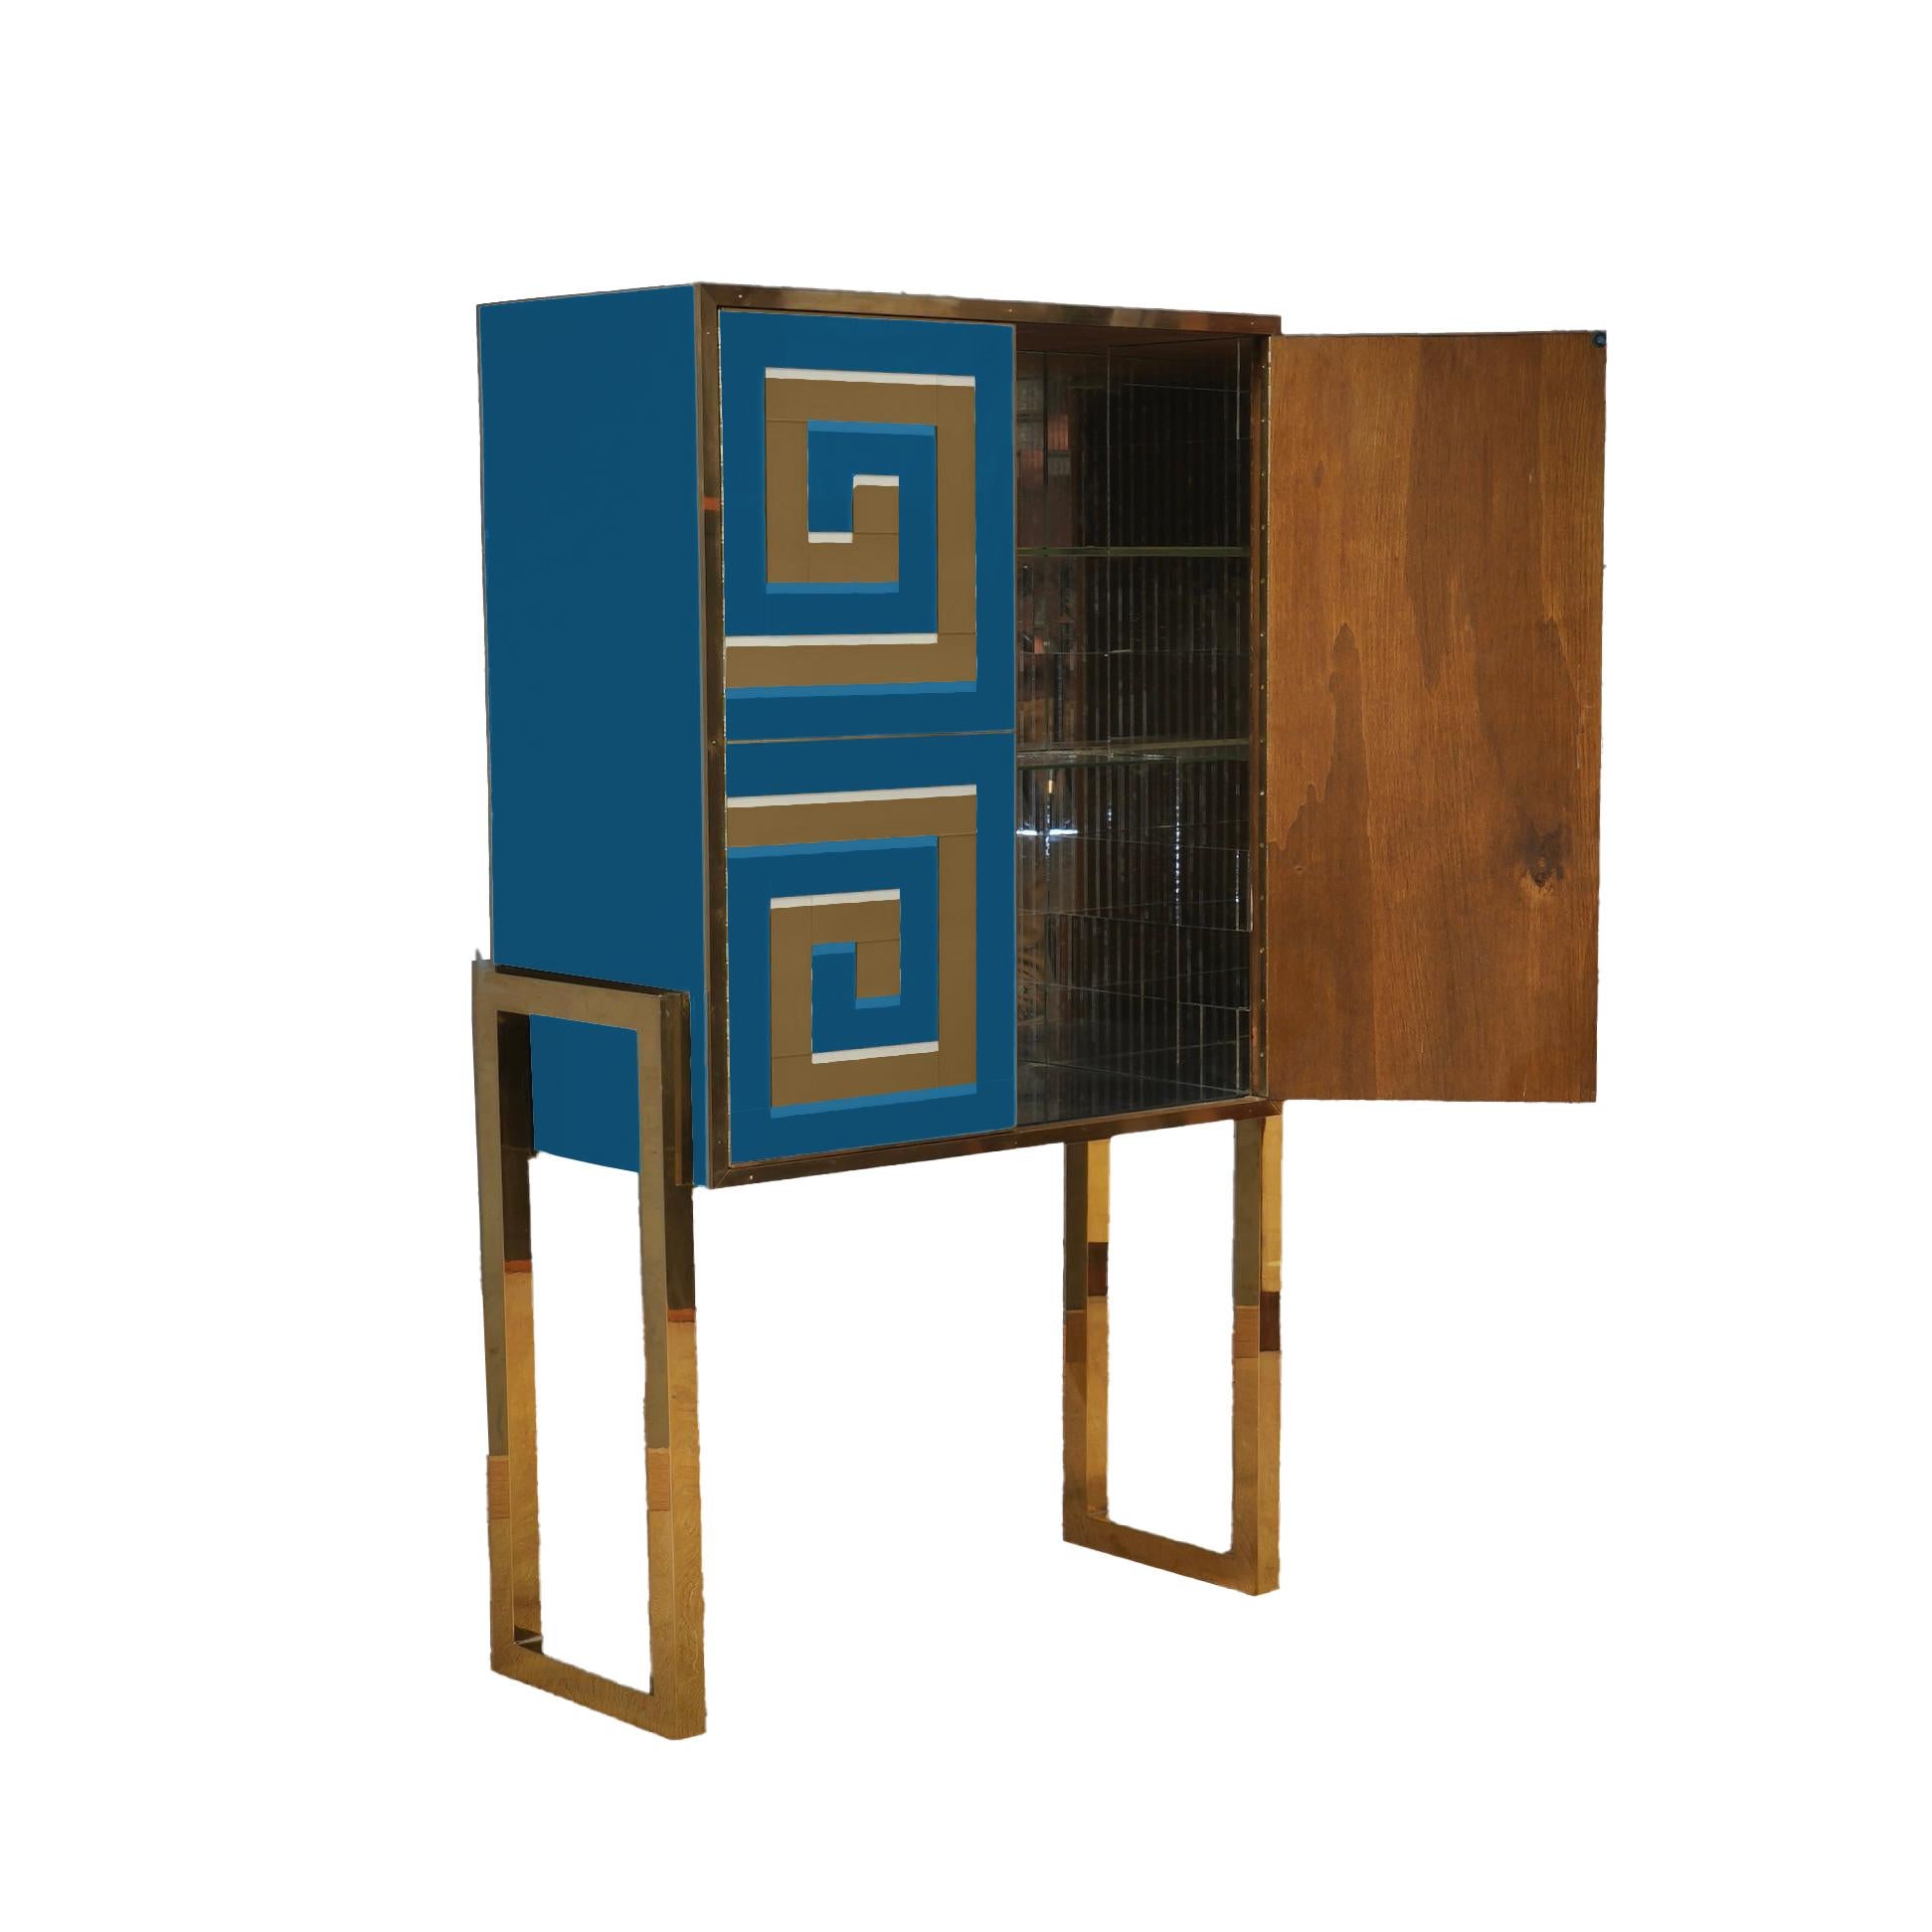 Murano Glass Cabinet with a 3D Optical Effect in blue and gold, a masterpiece of modern craftsmanship that combines the timeless elegance of Mid-Century design with the unique artistry of Italian artisans. 

Murano glass carvings that create a